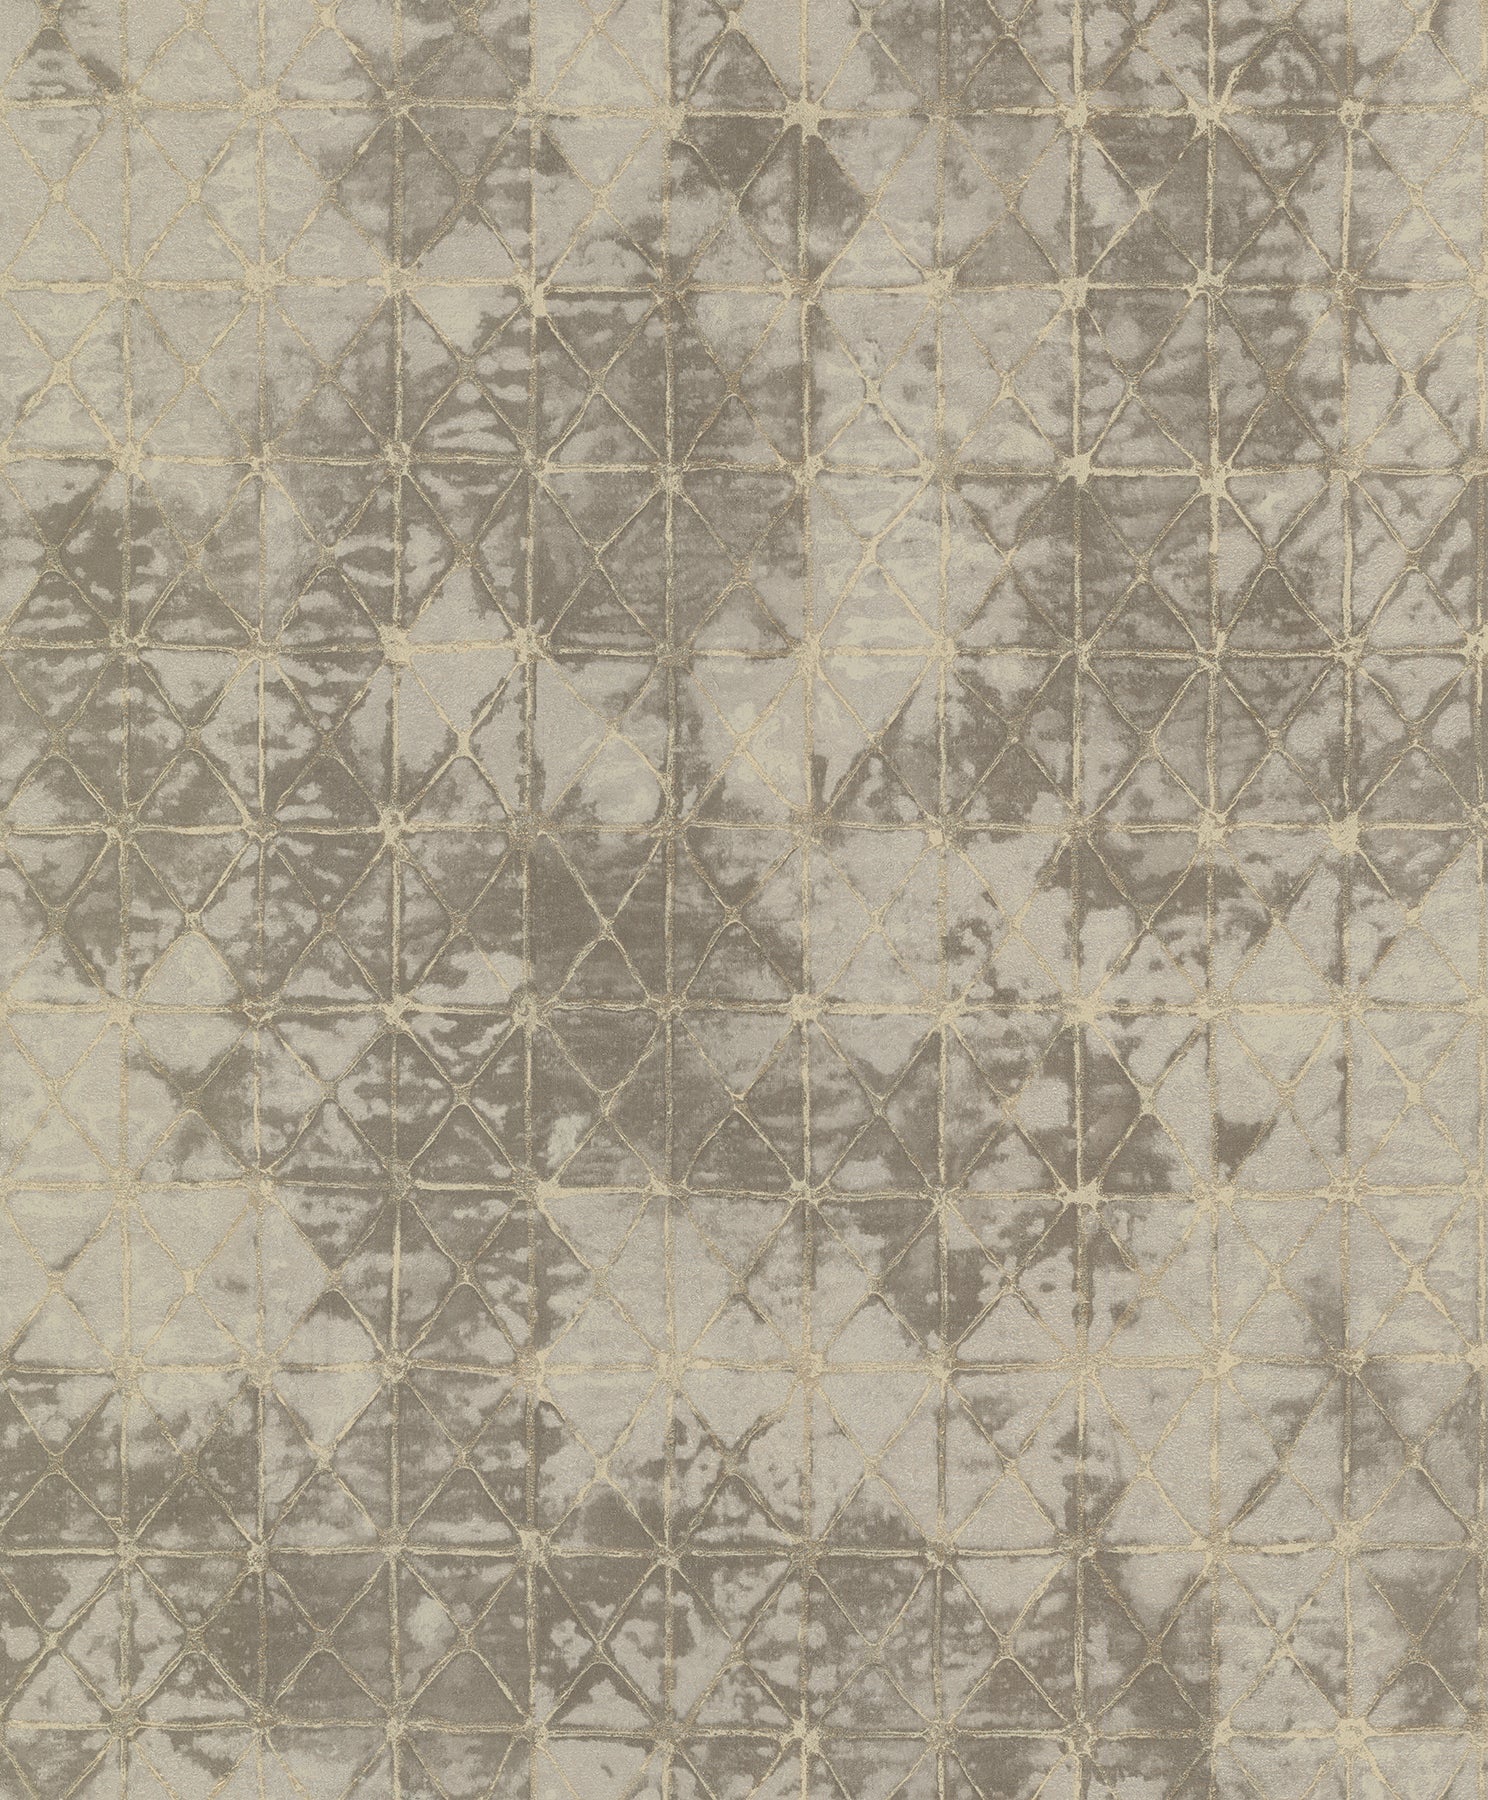 Save on 2971-86374 Dimensions Odell Bronze Antique Tiles Bronze A-Street Prints Wallpaper